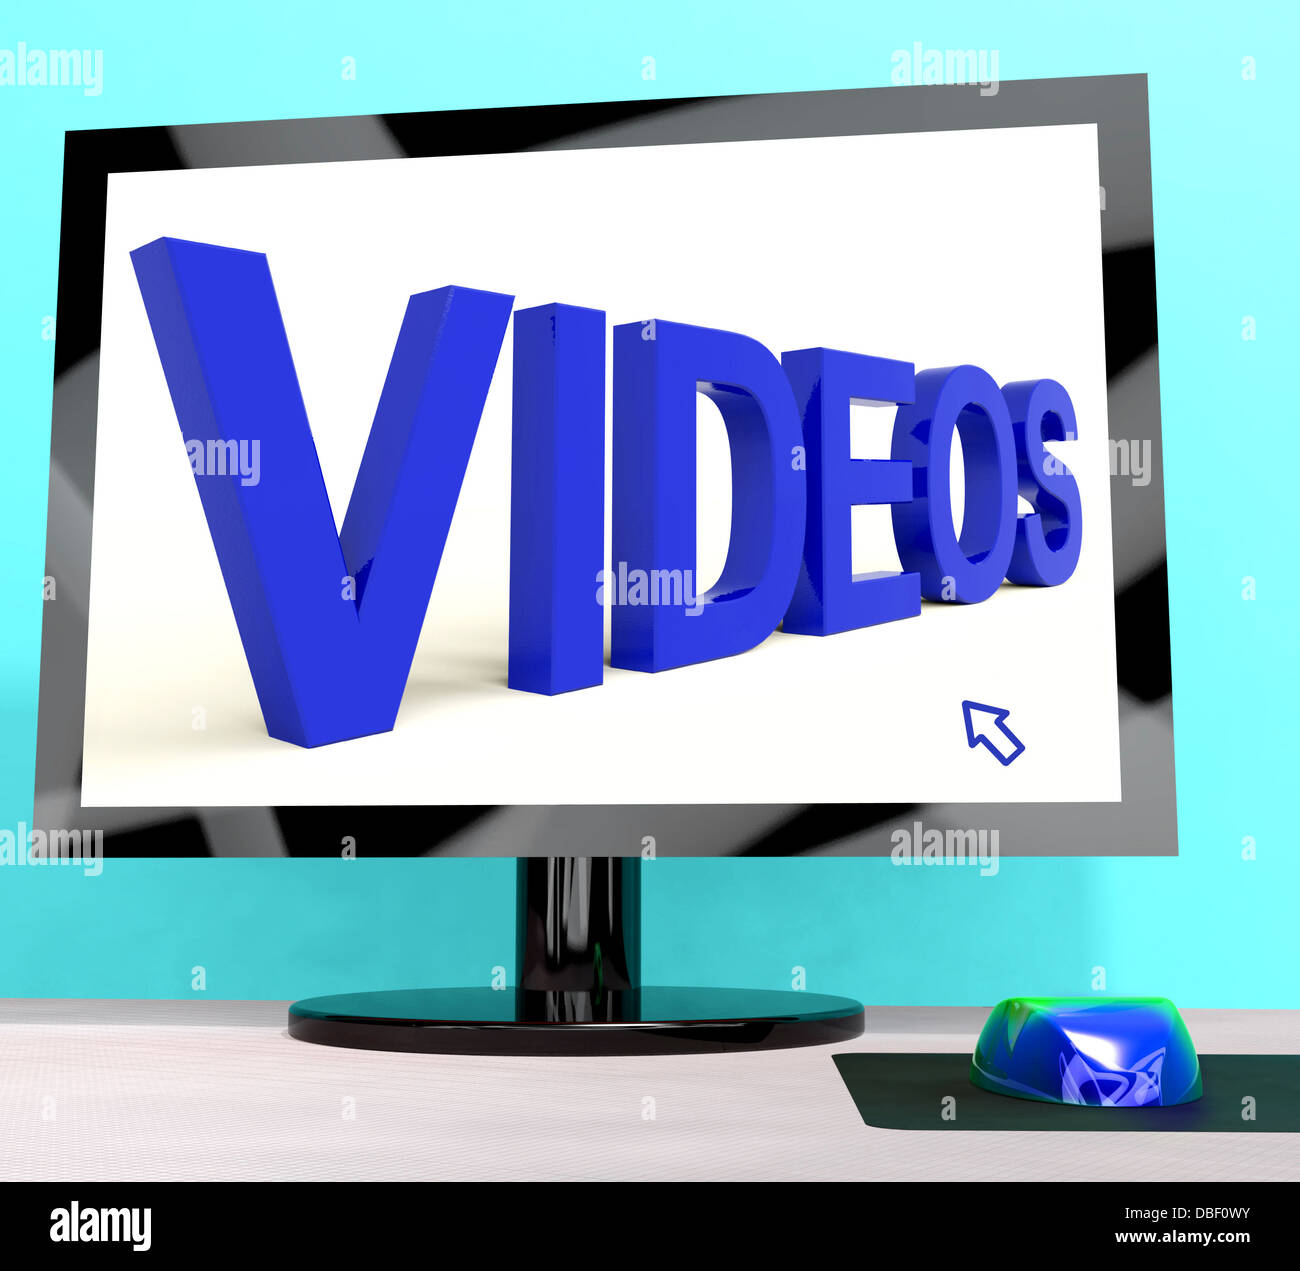 Videos Word On Computer Showing Dvd Or Multimedia Stock Photo